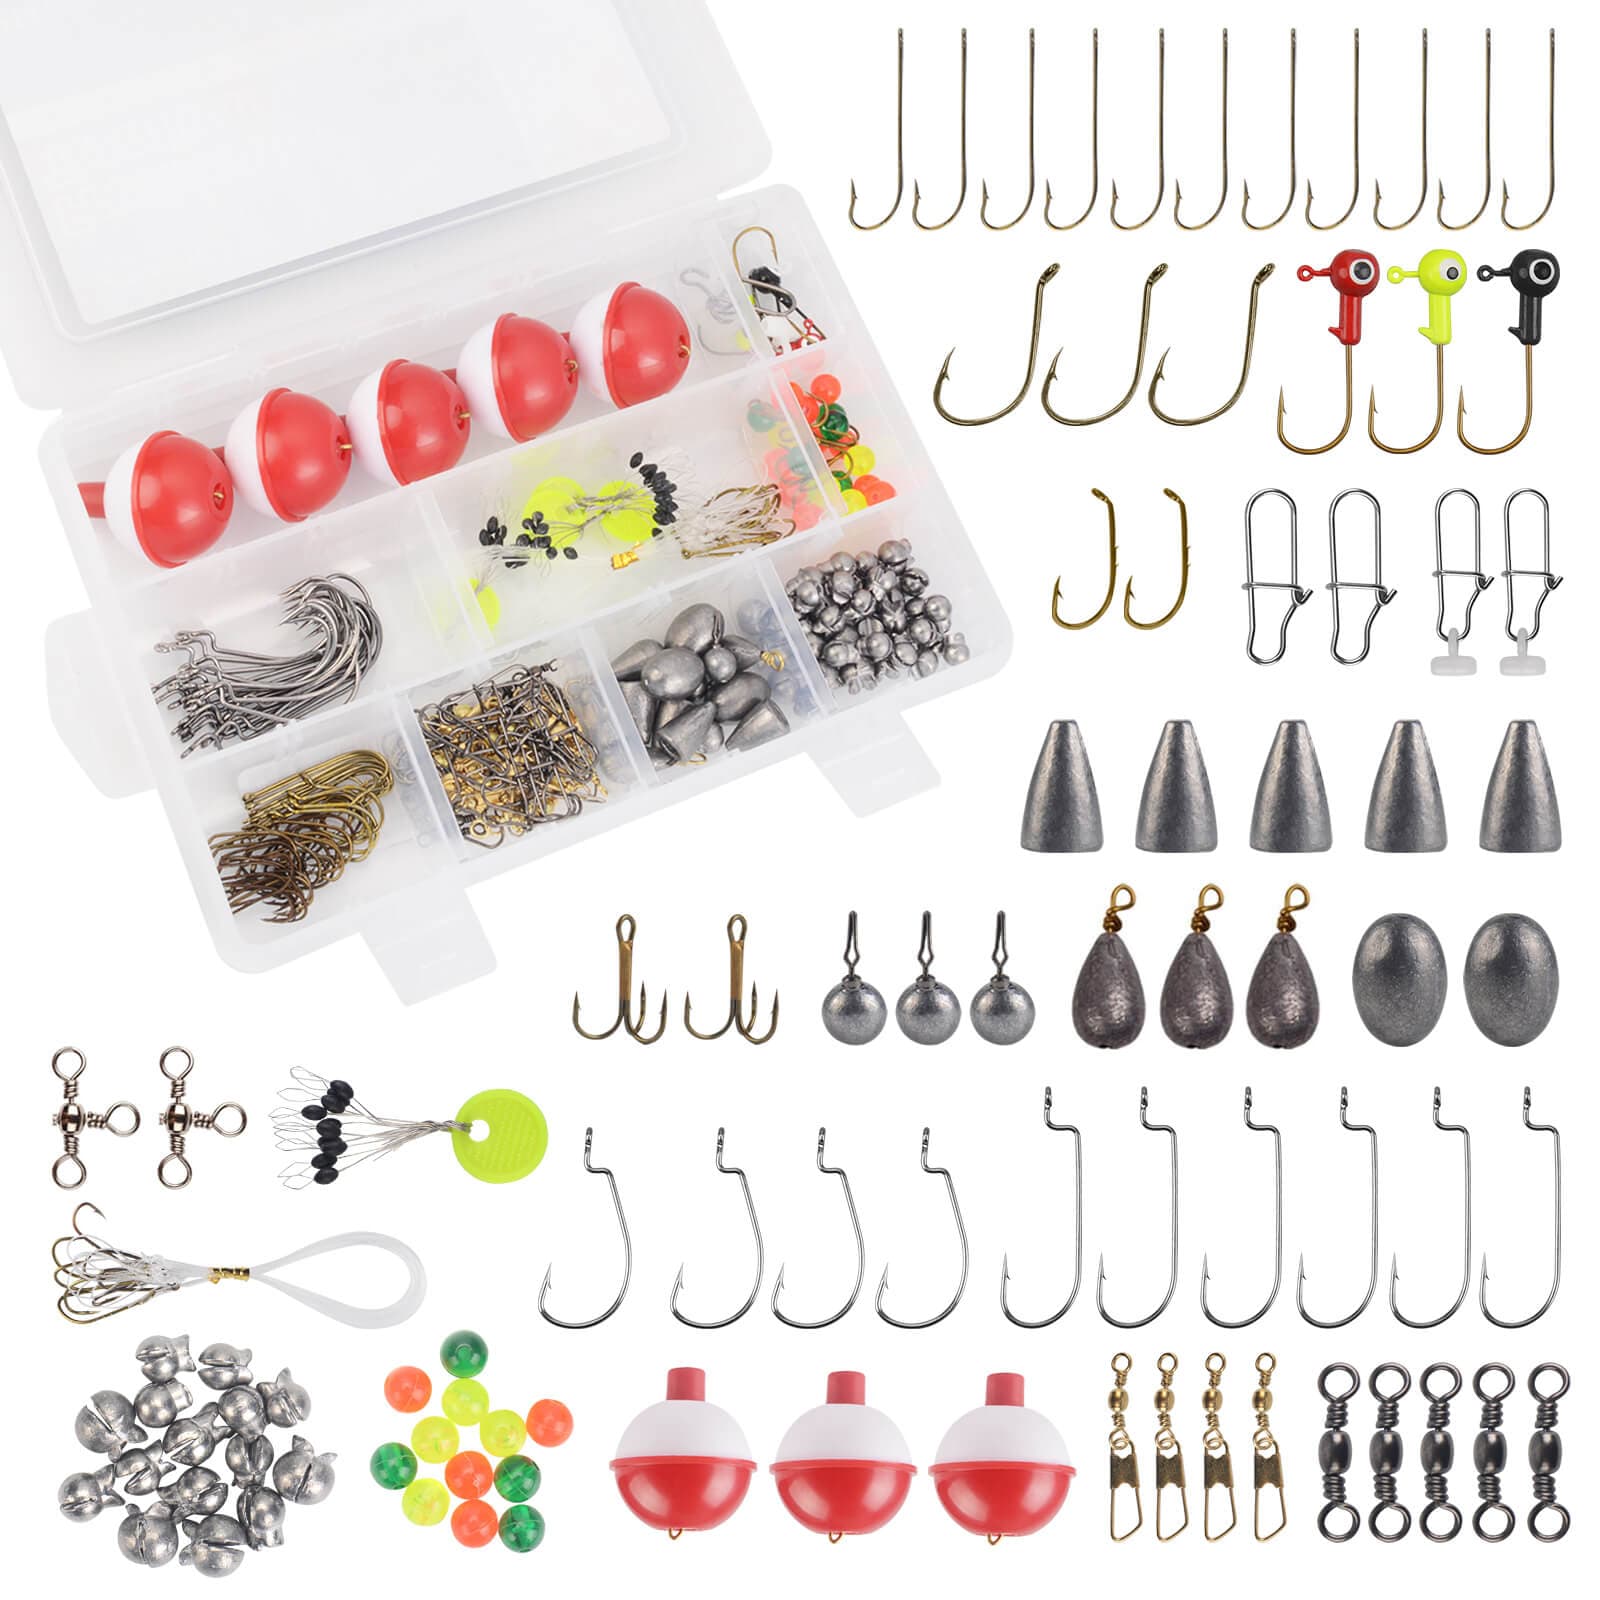 MadBite Species Tackle Kits, 160 pcs Trout Fishing Lures, Hooks, Soft  Plastic Fishing Baits, Terminal Tackle, Weights, Sinkers